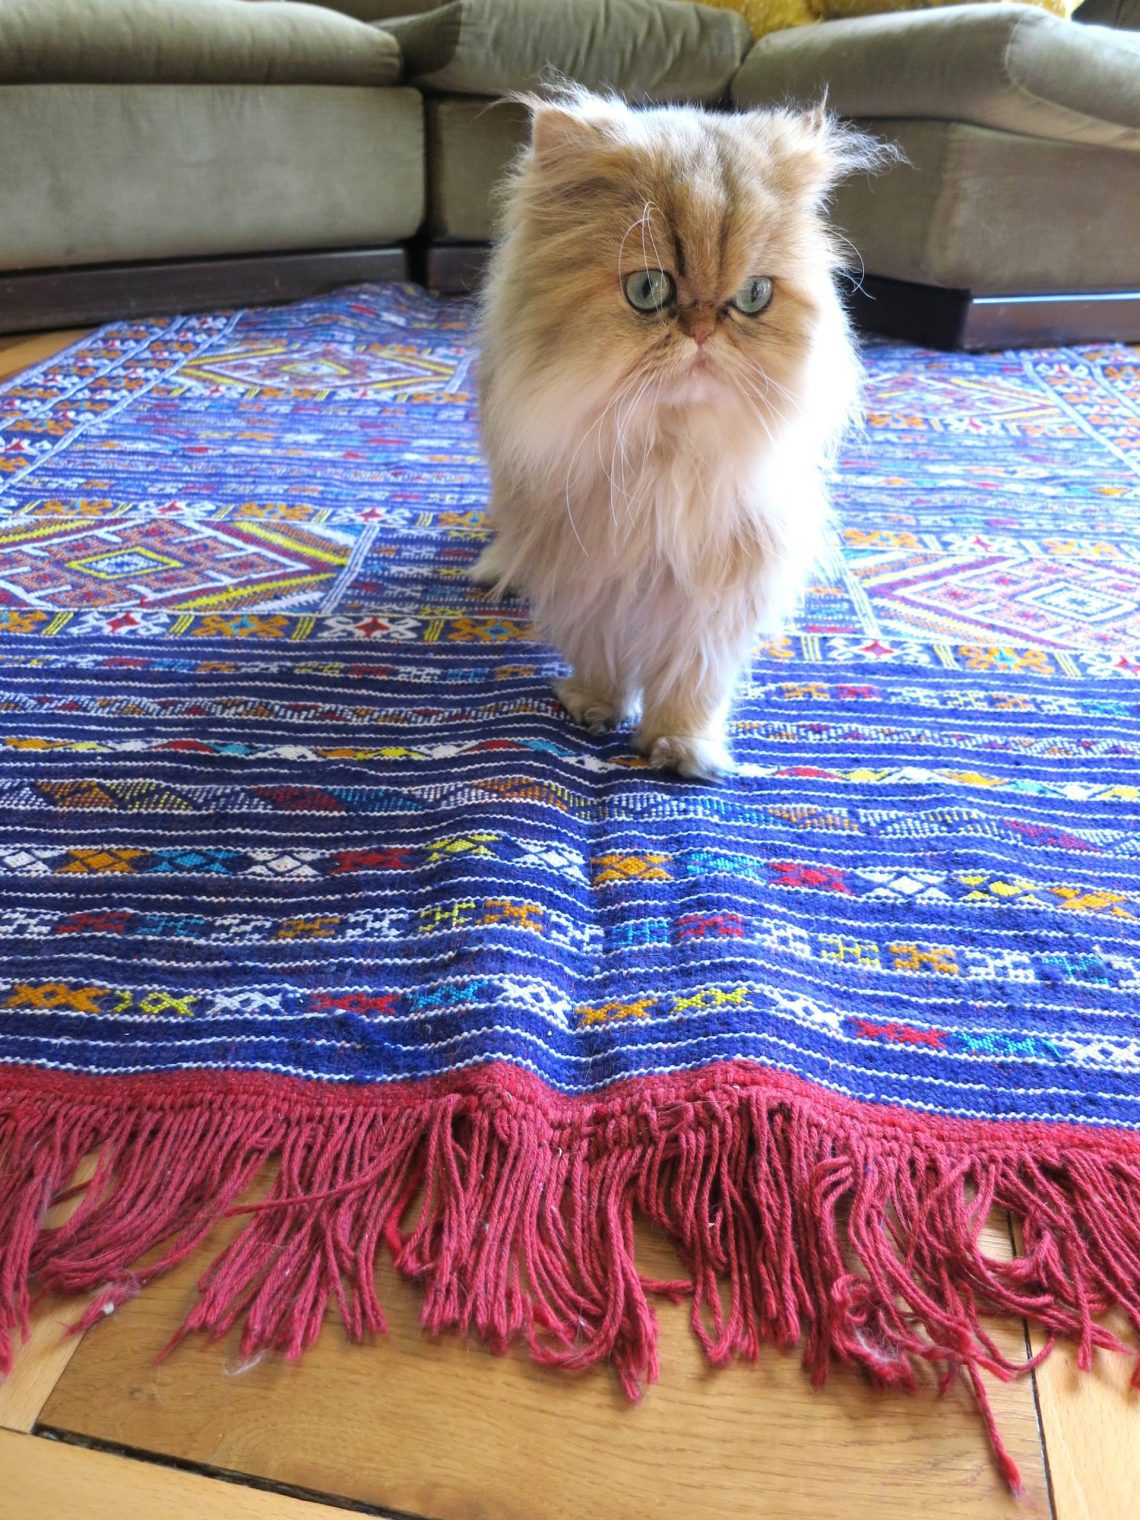 Rugs for cats